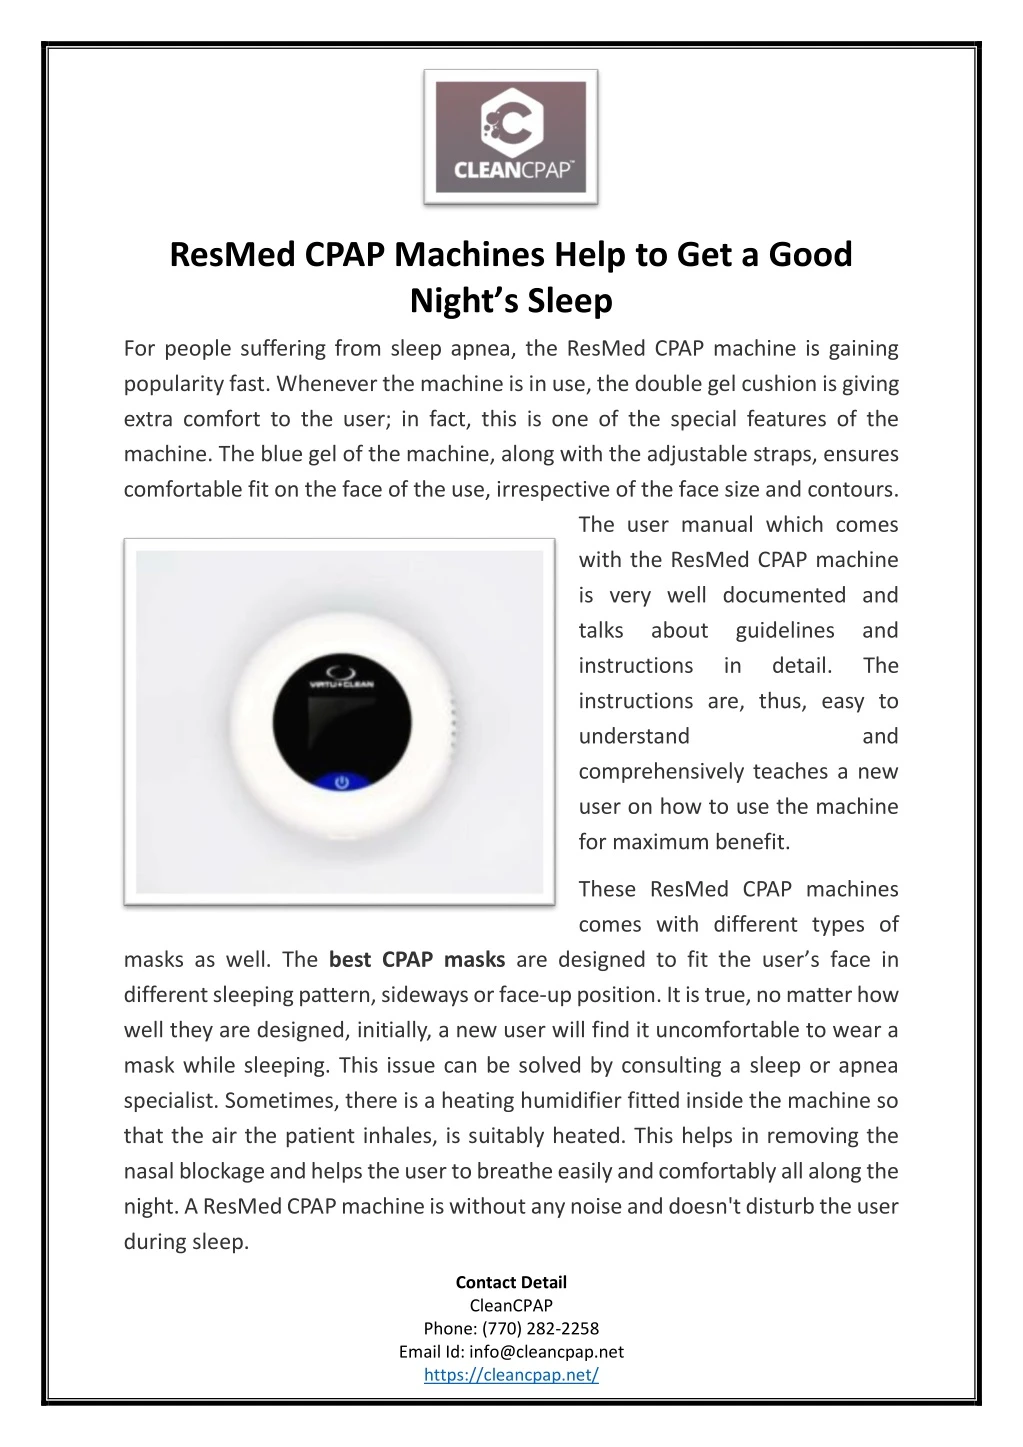 resmed cpap machines help to get a good night